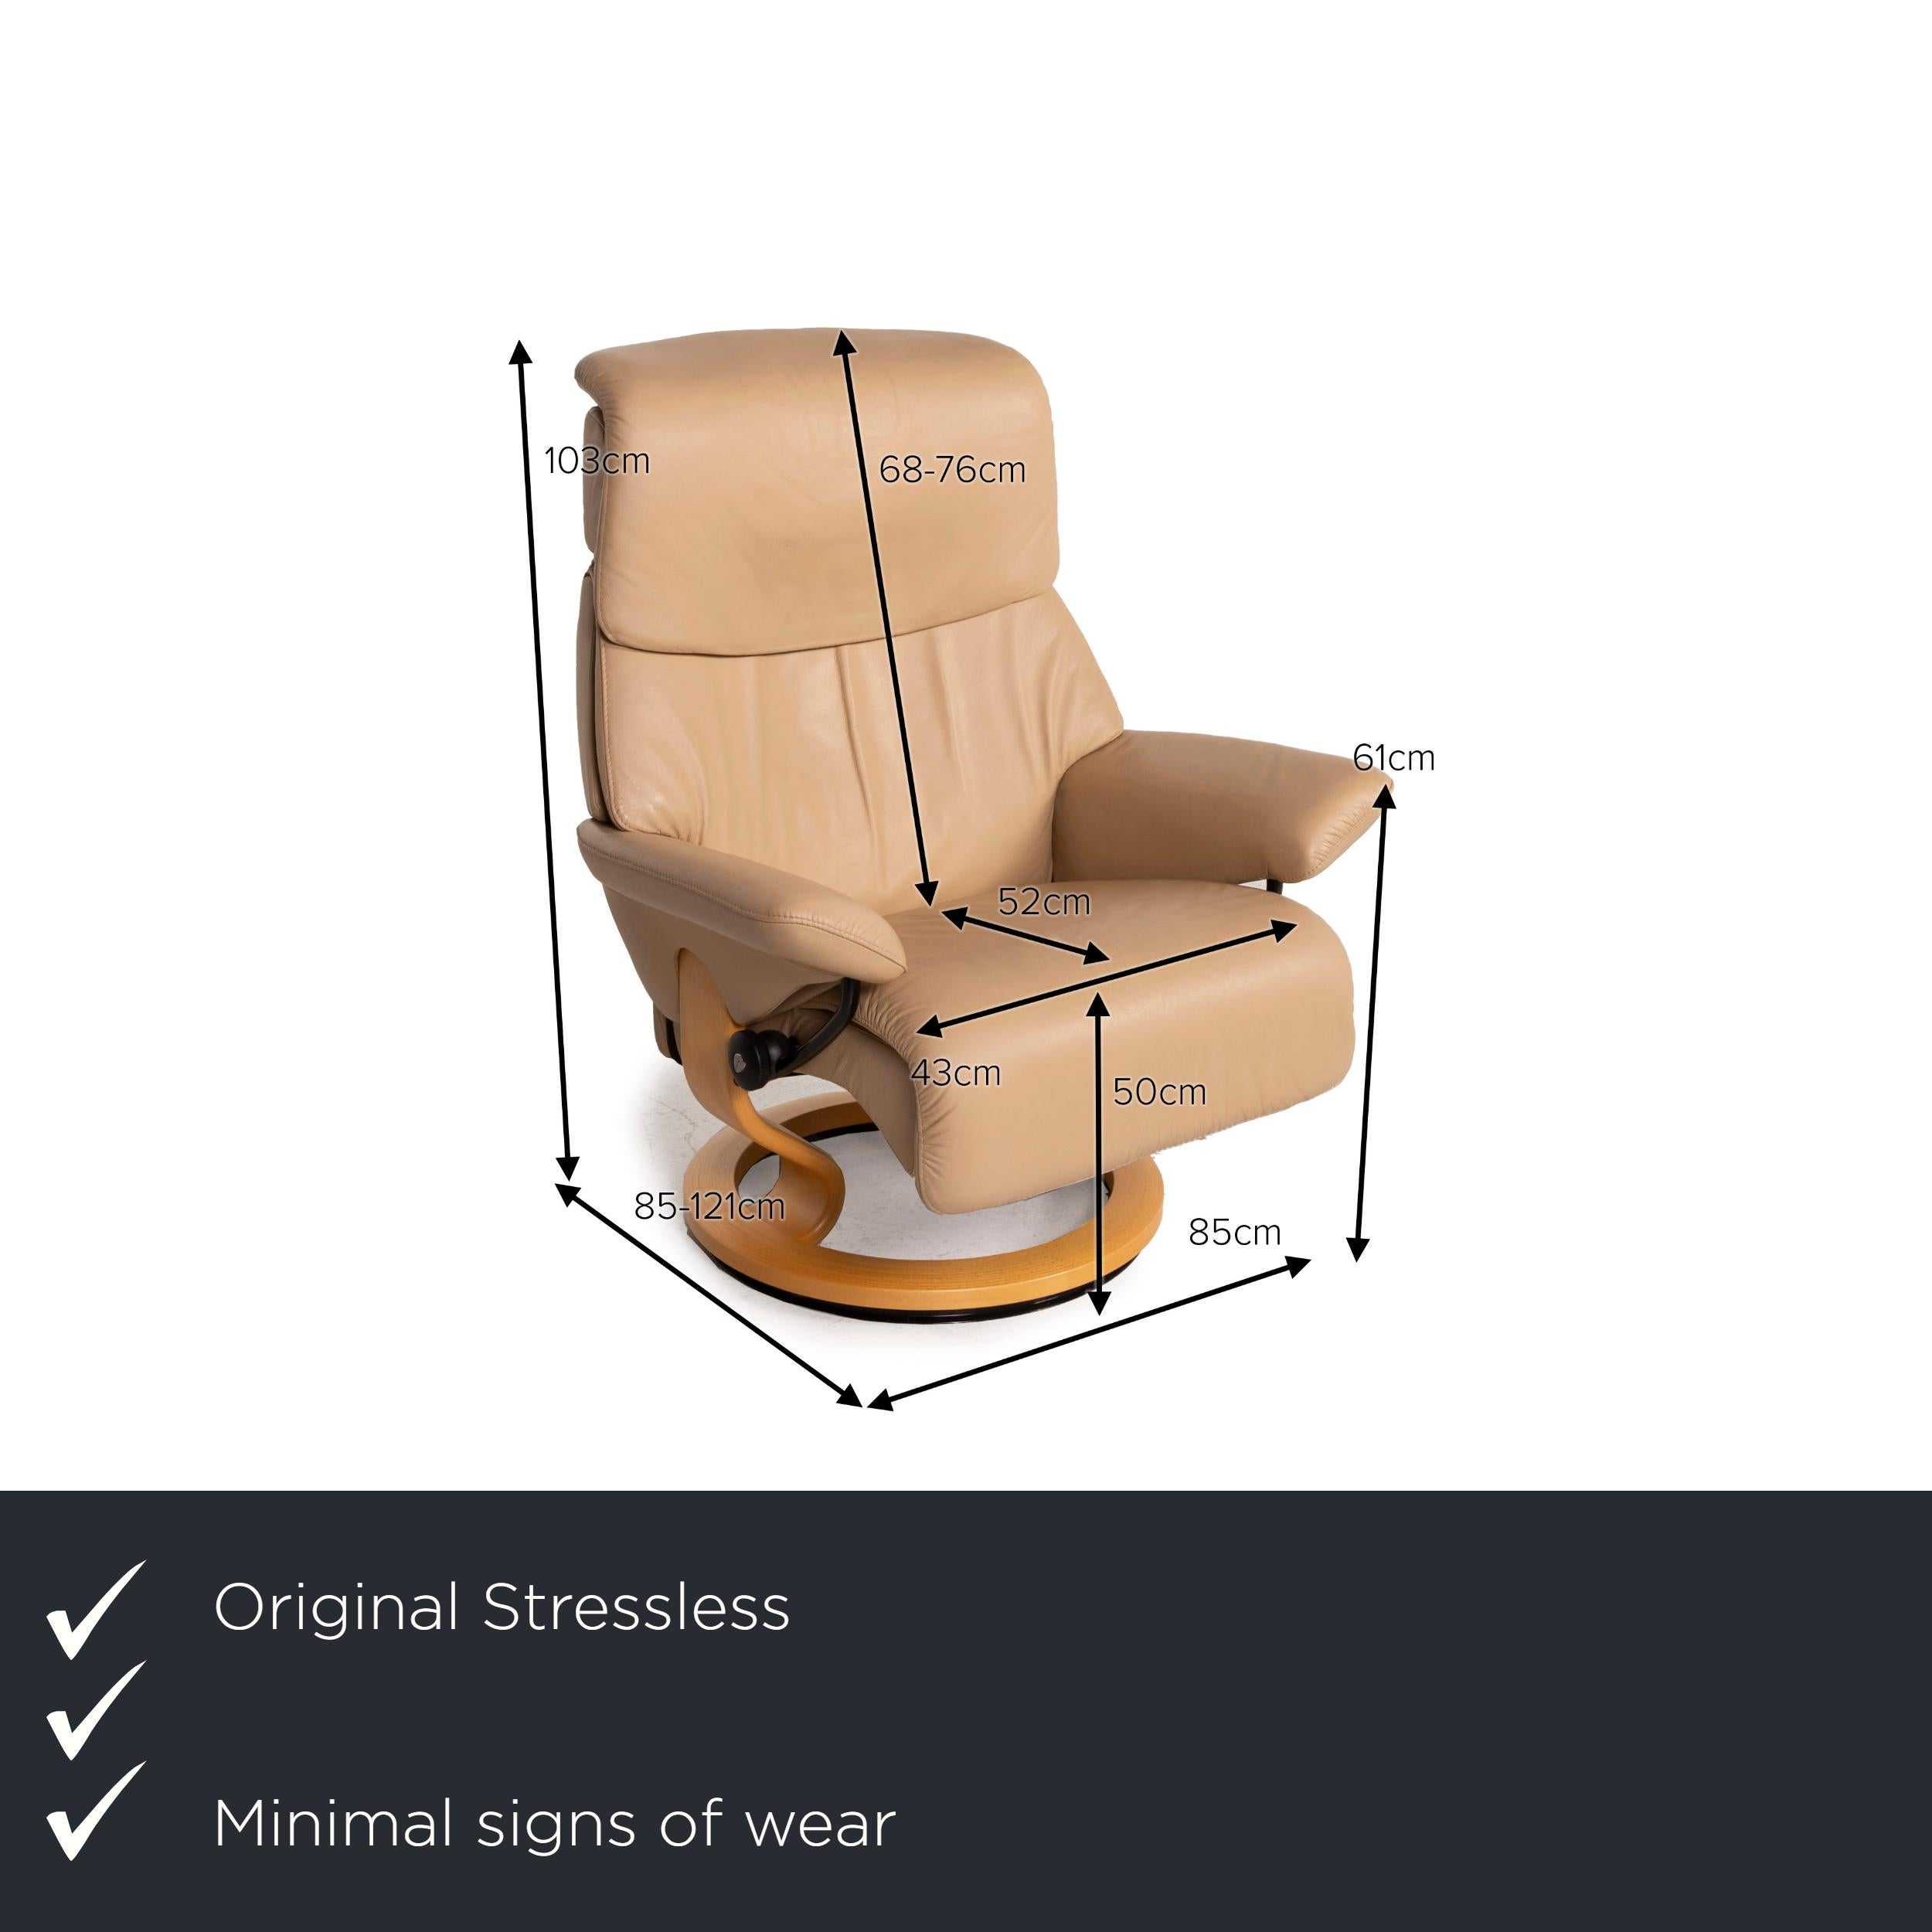 We present to you a Stressless Dream leather armchair beige incl.


 Product measurements in centimeters:
 

Depth: 85
Width: 85
Height: 103
Seat height: 50
Rest height: 61
Seat depth: 52
Seat width: 43
Back height: 68.

 